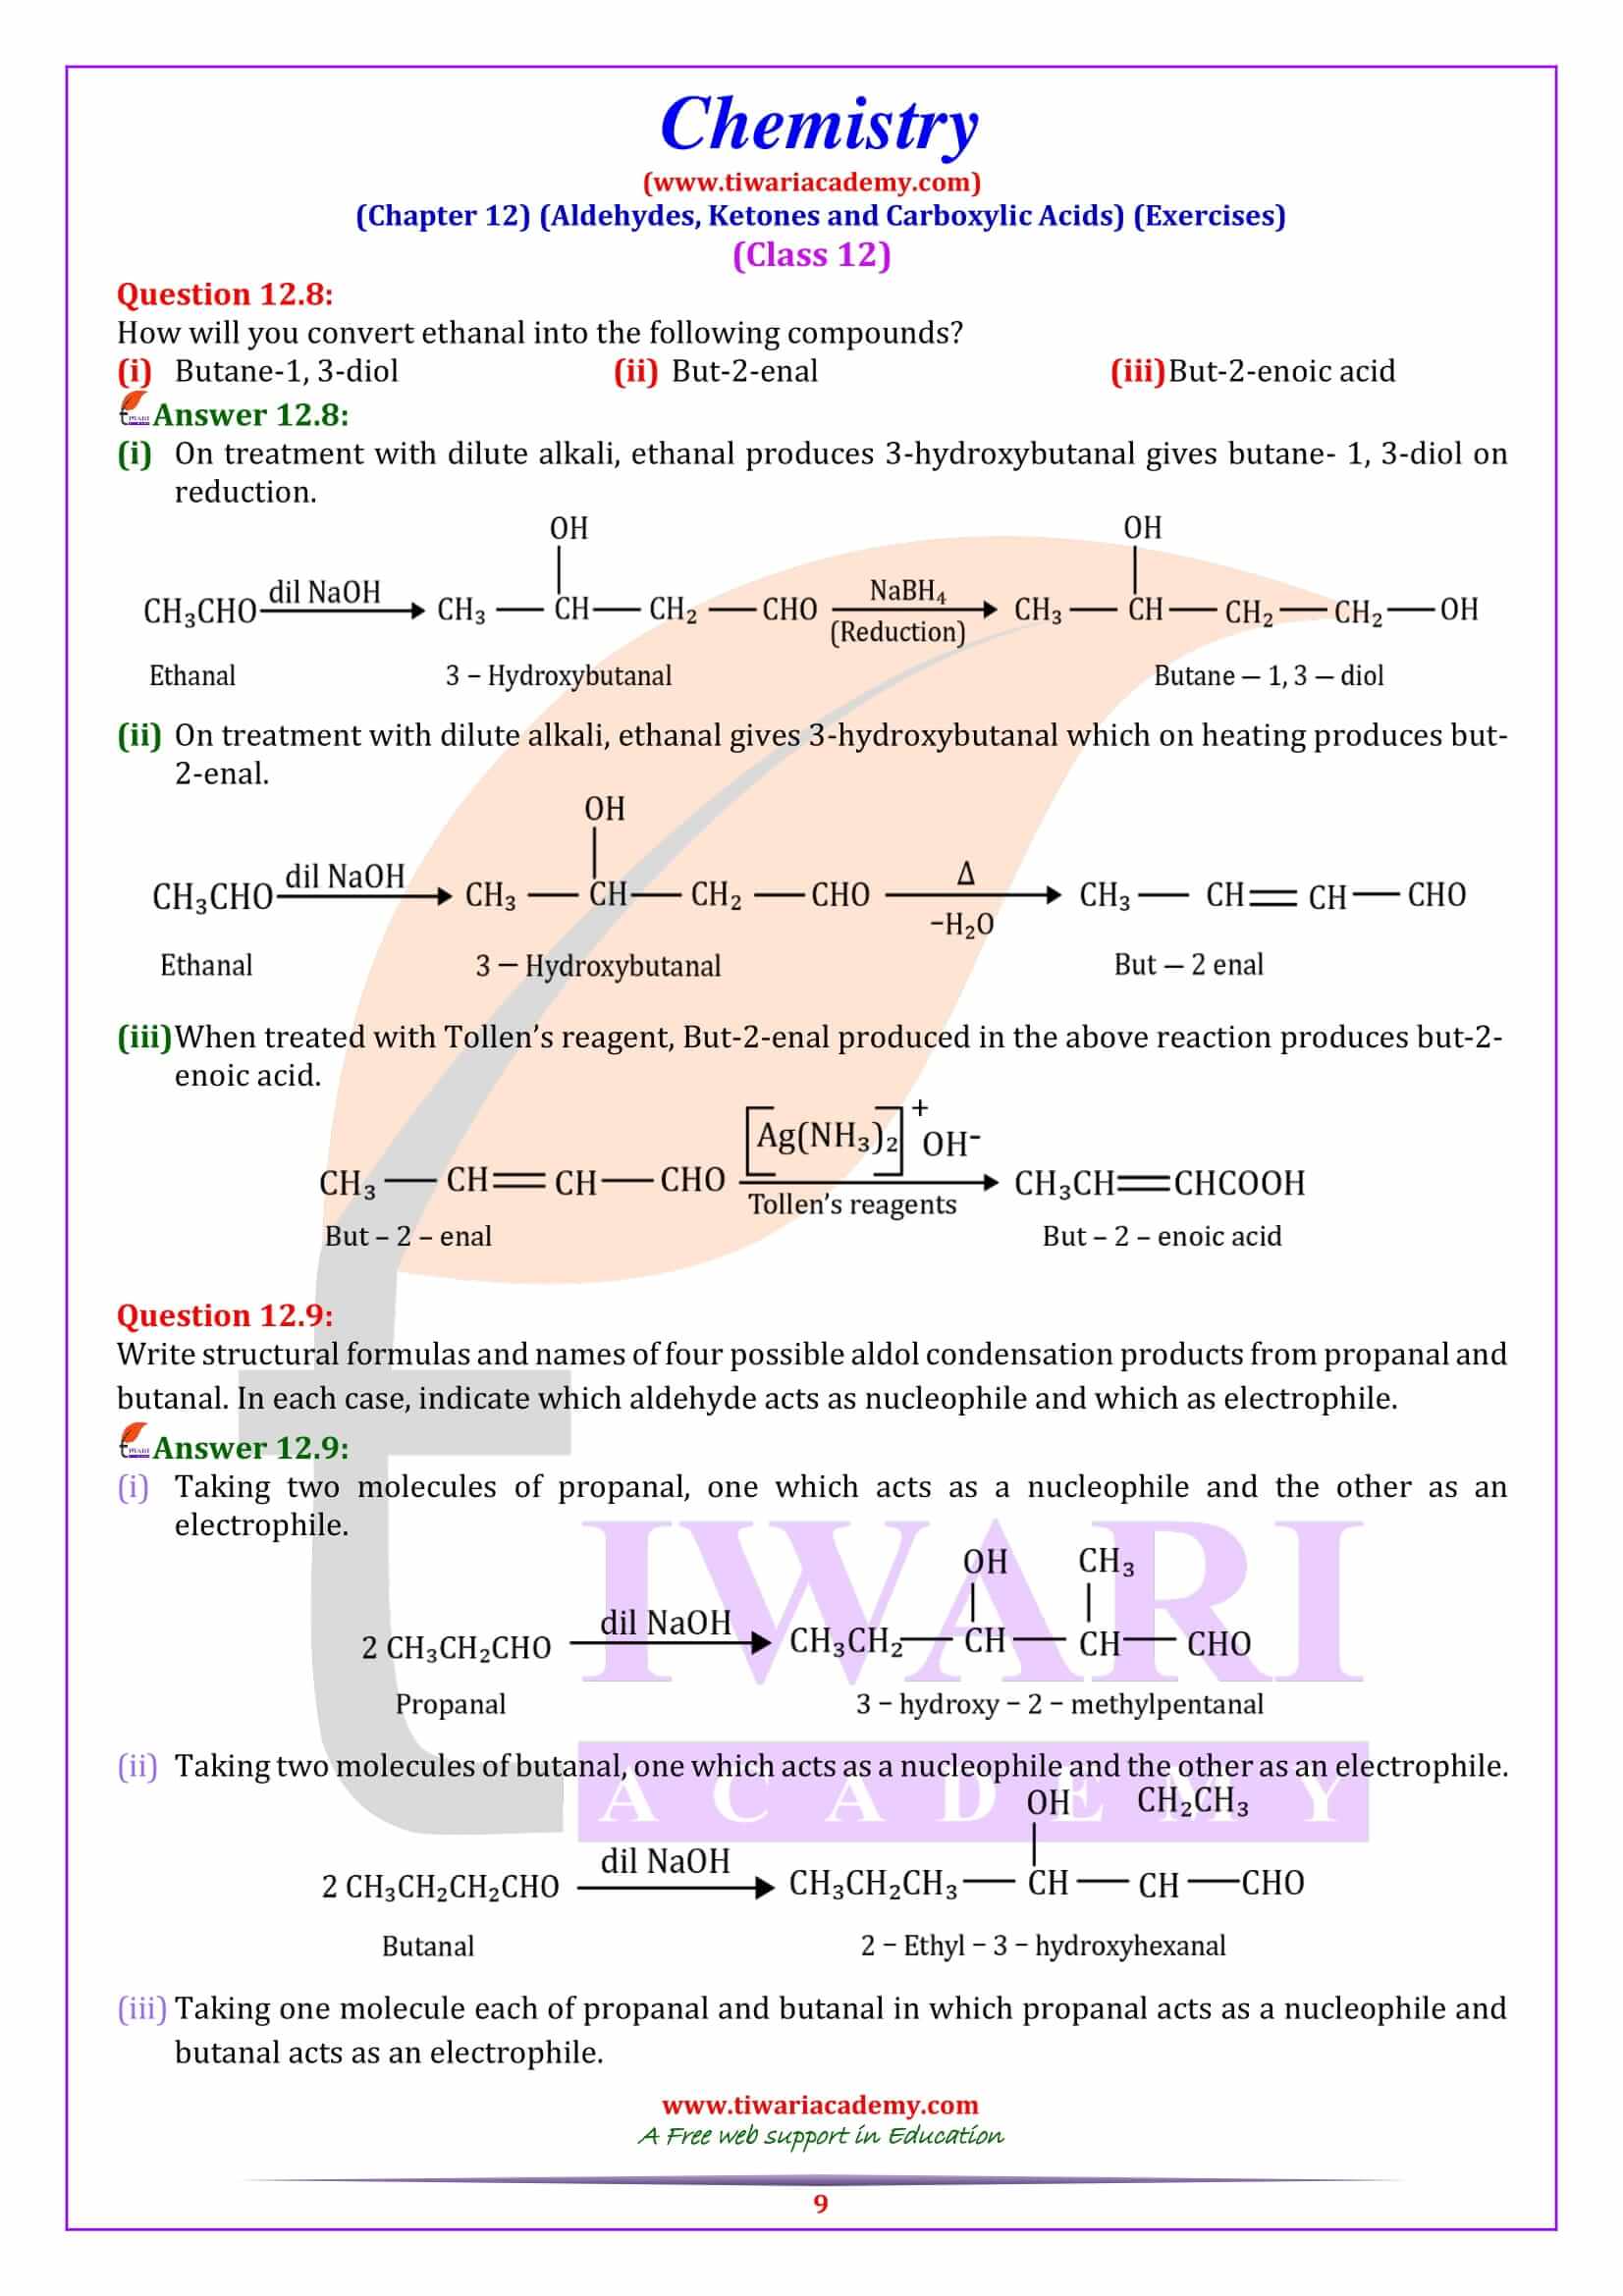 NCERT Solutions for Class 12 Chemistry Chapter 12 all answers